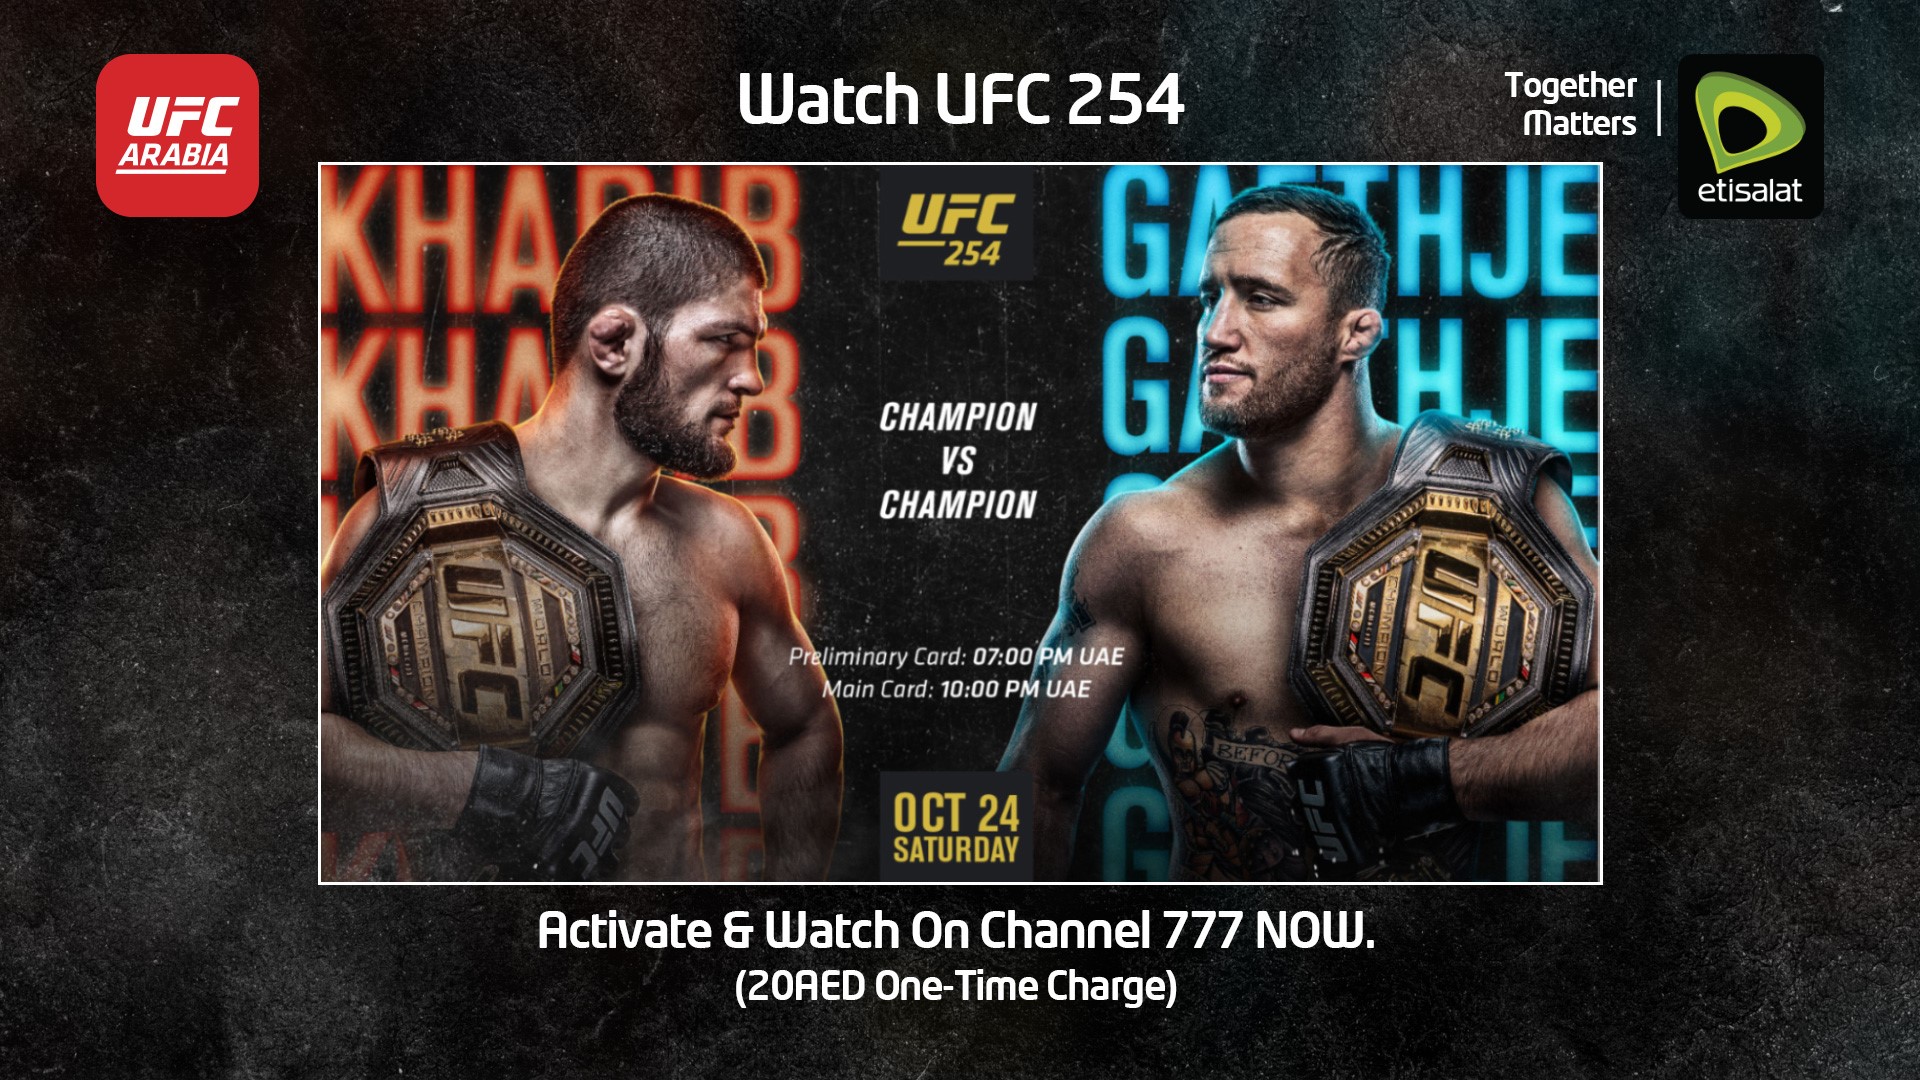 Abu Dhabi Media & Etisalat Offer Fans The Chance To Watch The Much Anticipated UFC 254: KHABIB vs GAETHJE